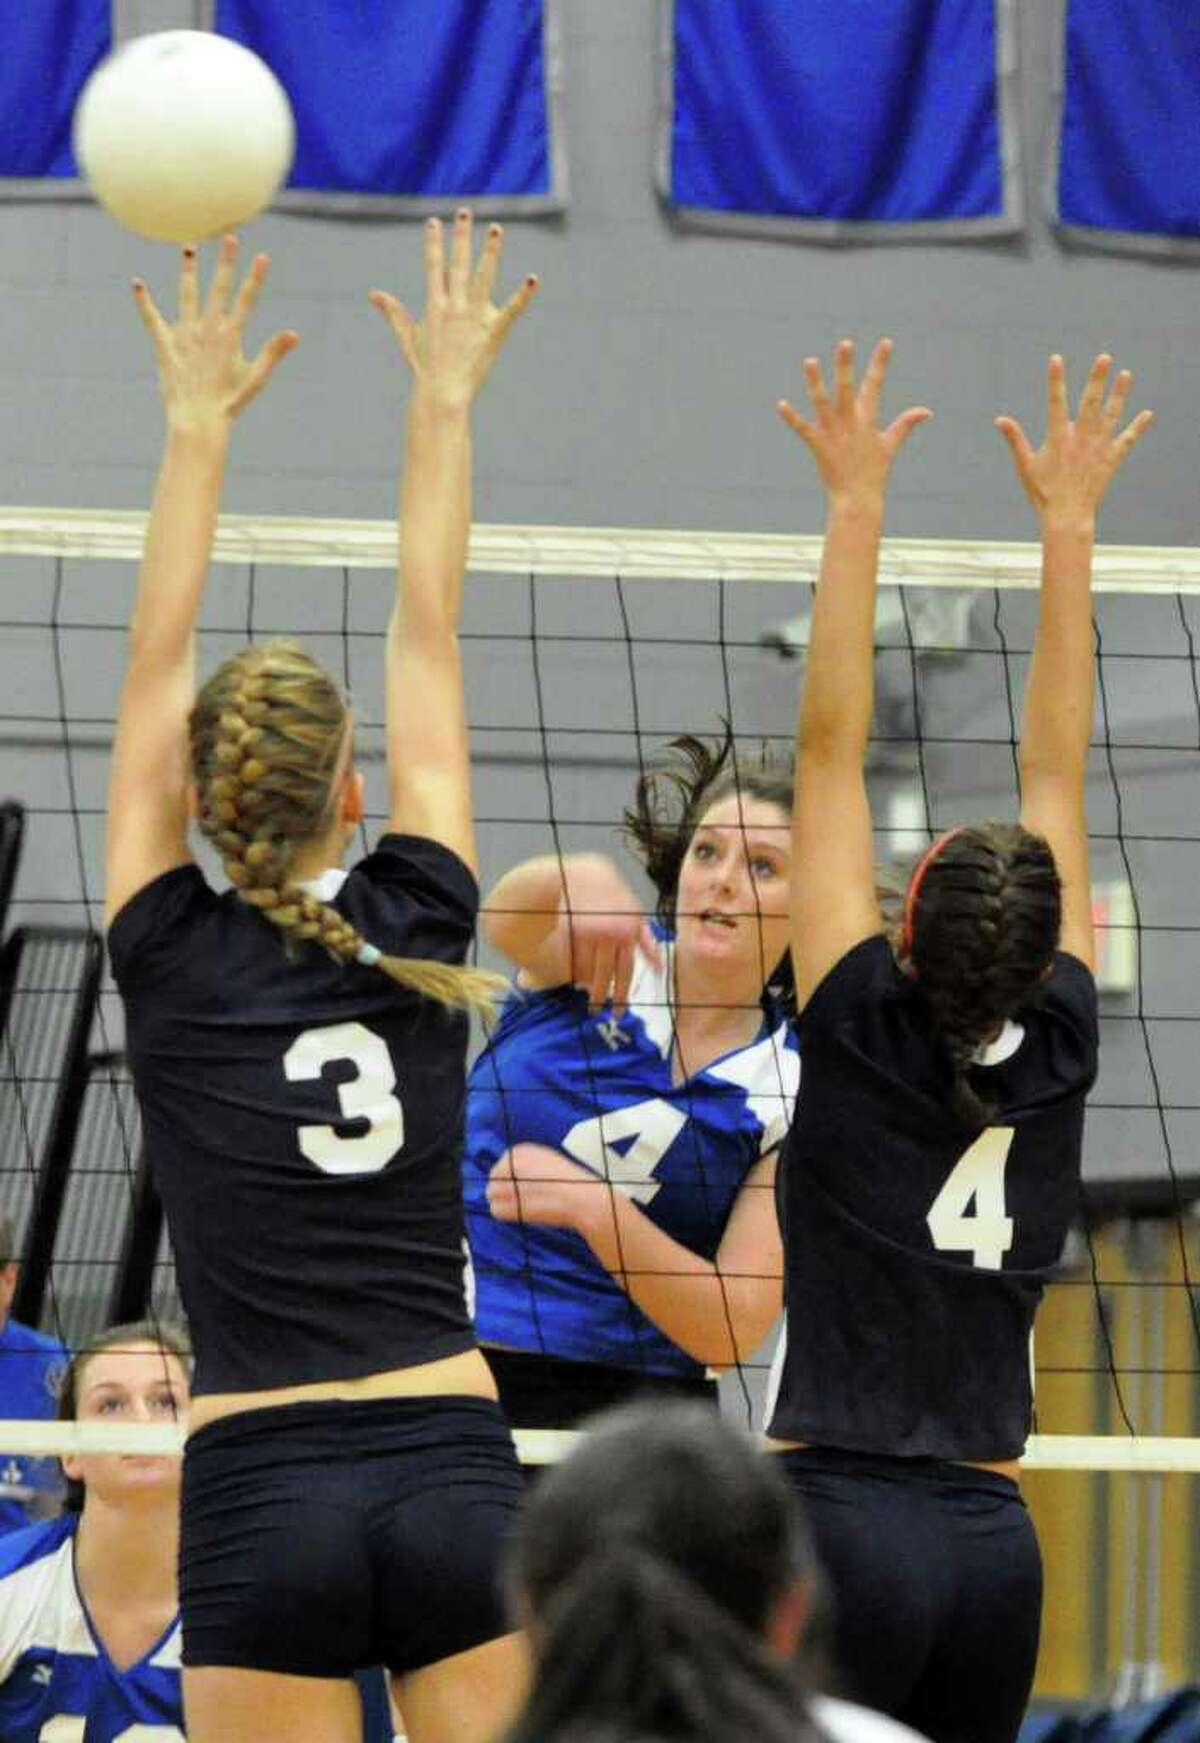 Fairfield Ludlowe's Dillon Casey sends the ball over the net to Staples' defenders Augie Gradoux-Matt and Lucy Stanley during the girls volleyball game at Ludlowe on Wednesday, Oct. 13, 2010.